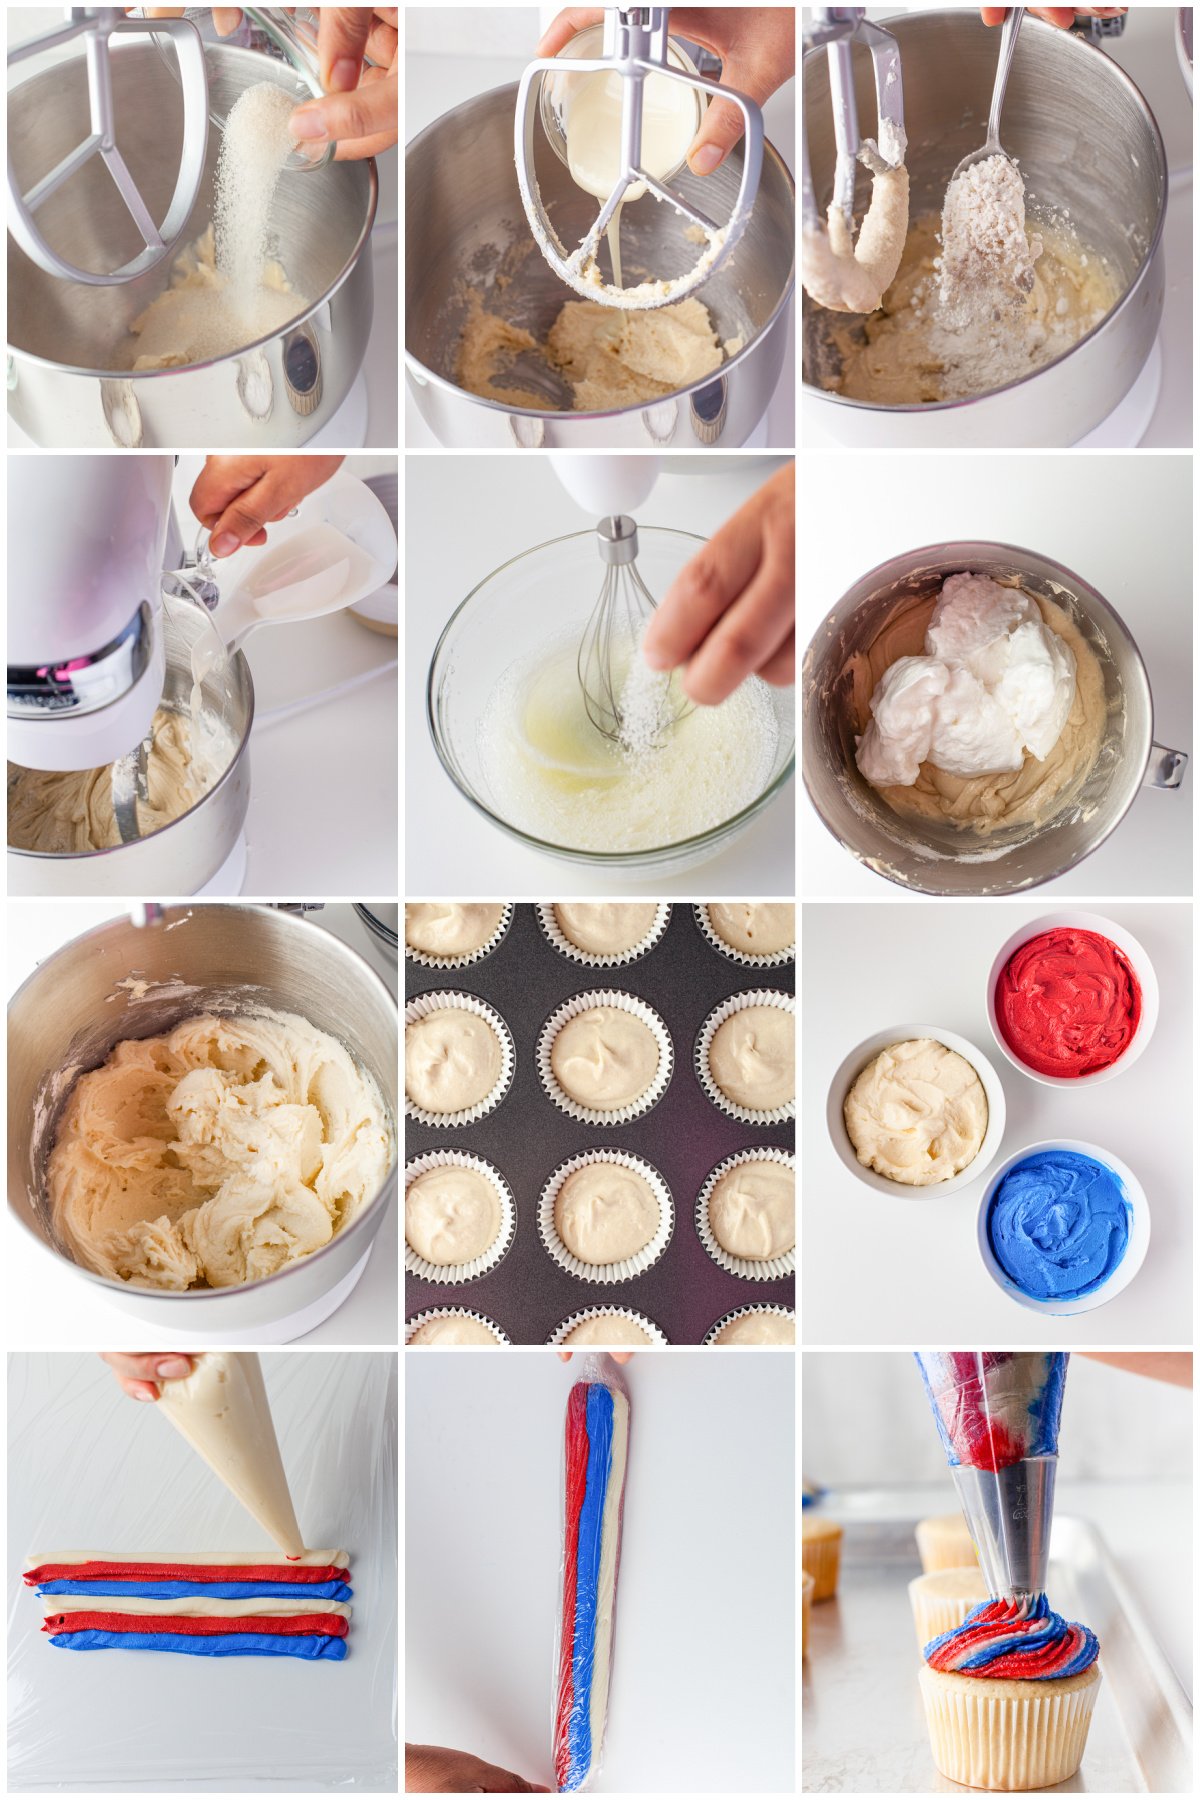 Step by step photos on how to make Patriotic Cupcakes.